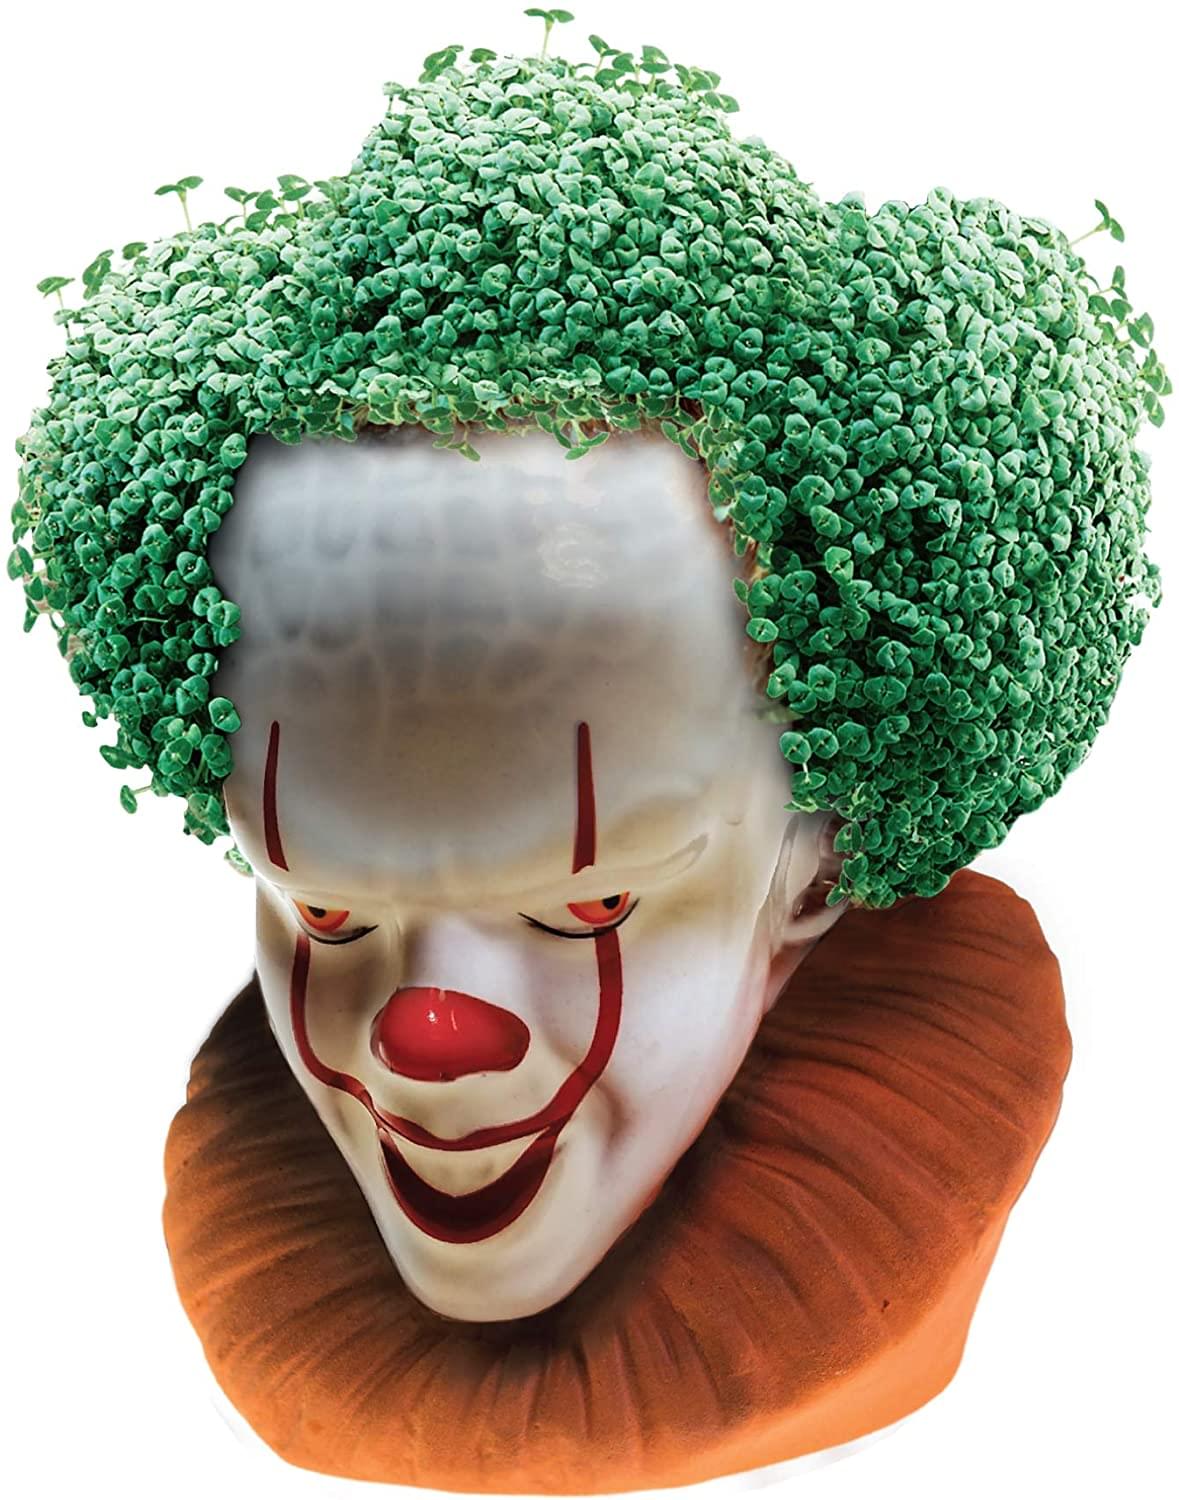 IT Pennywise Chia Pet Decorative Planter